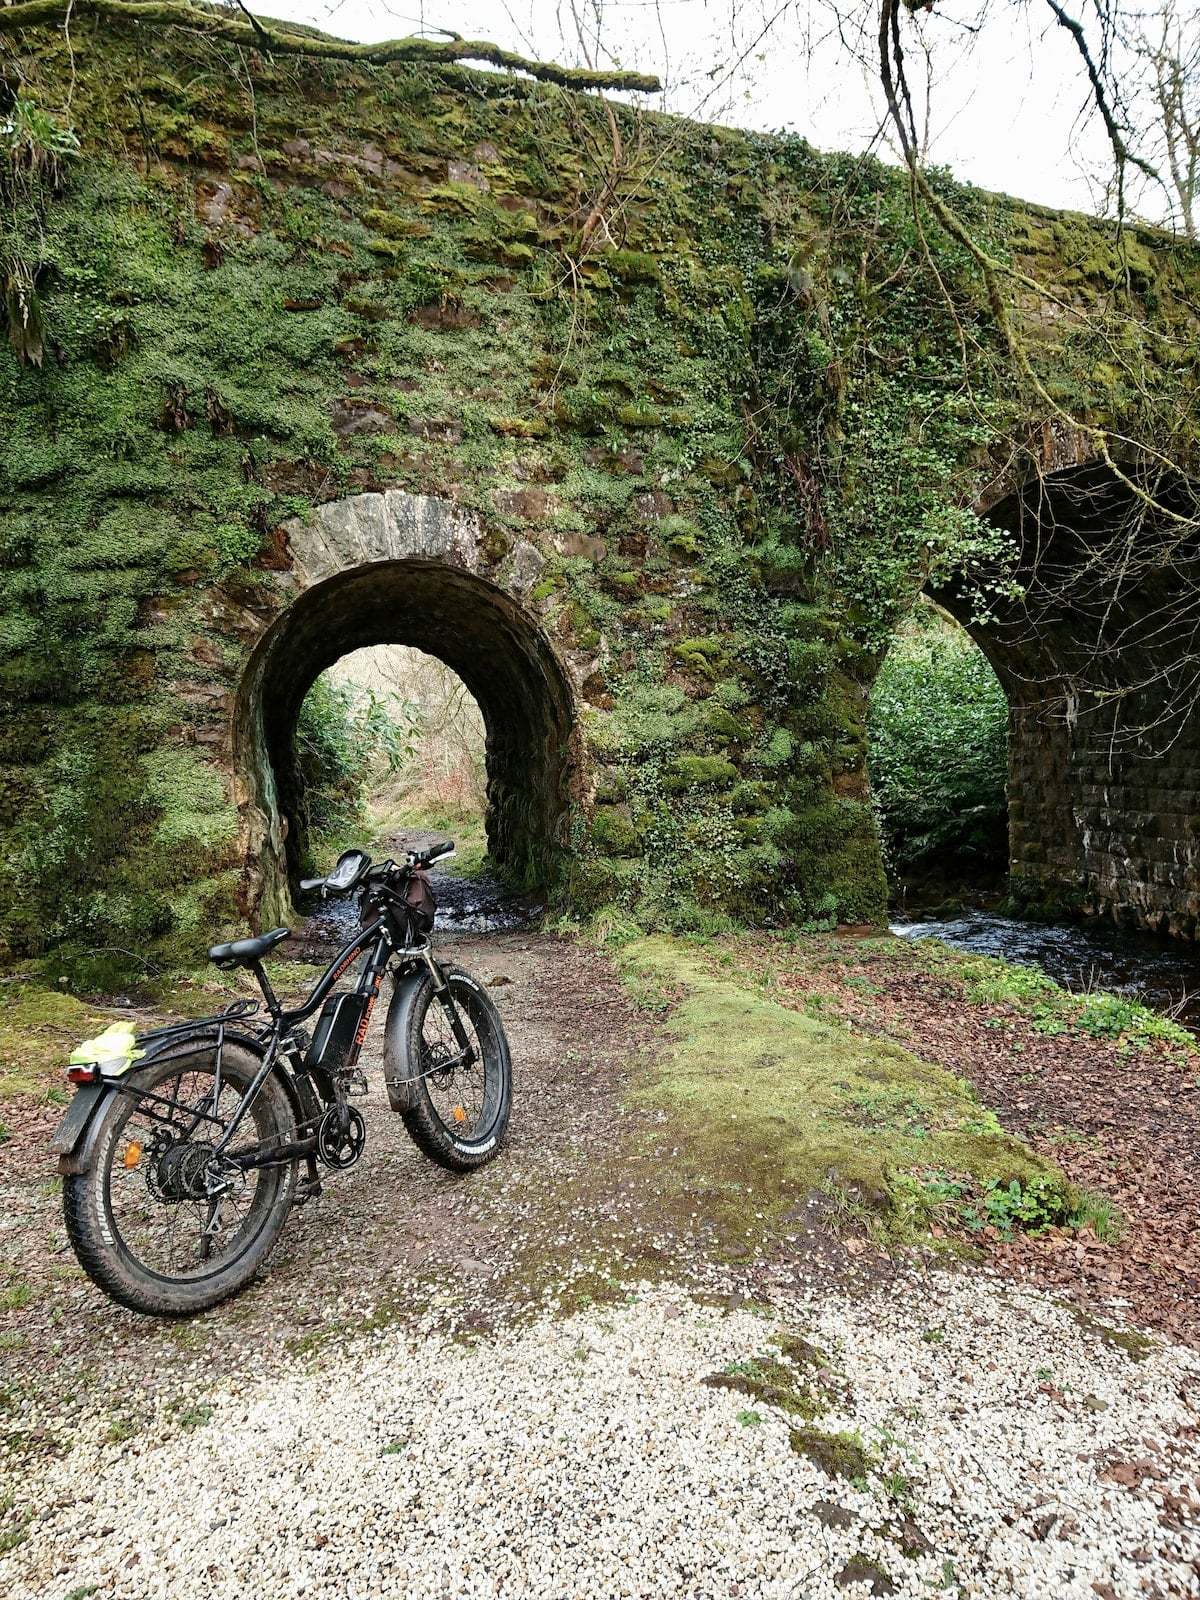 A black bicycle parked on a dirt path near a stone bridge in Galway